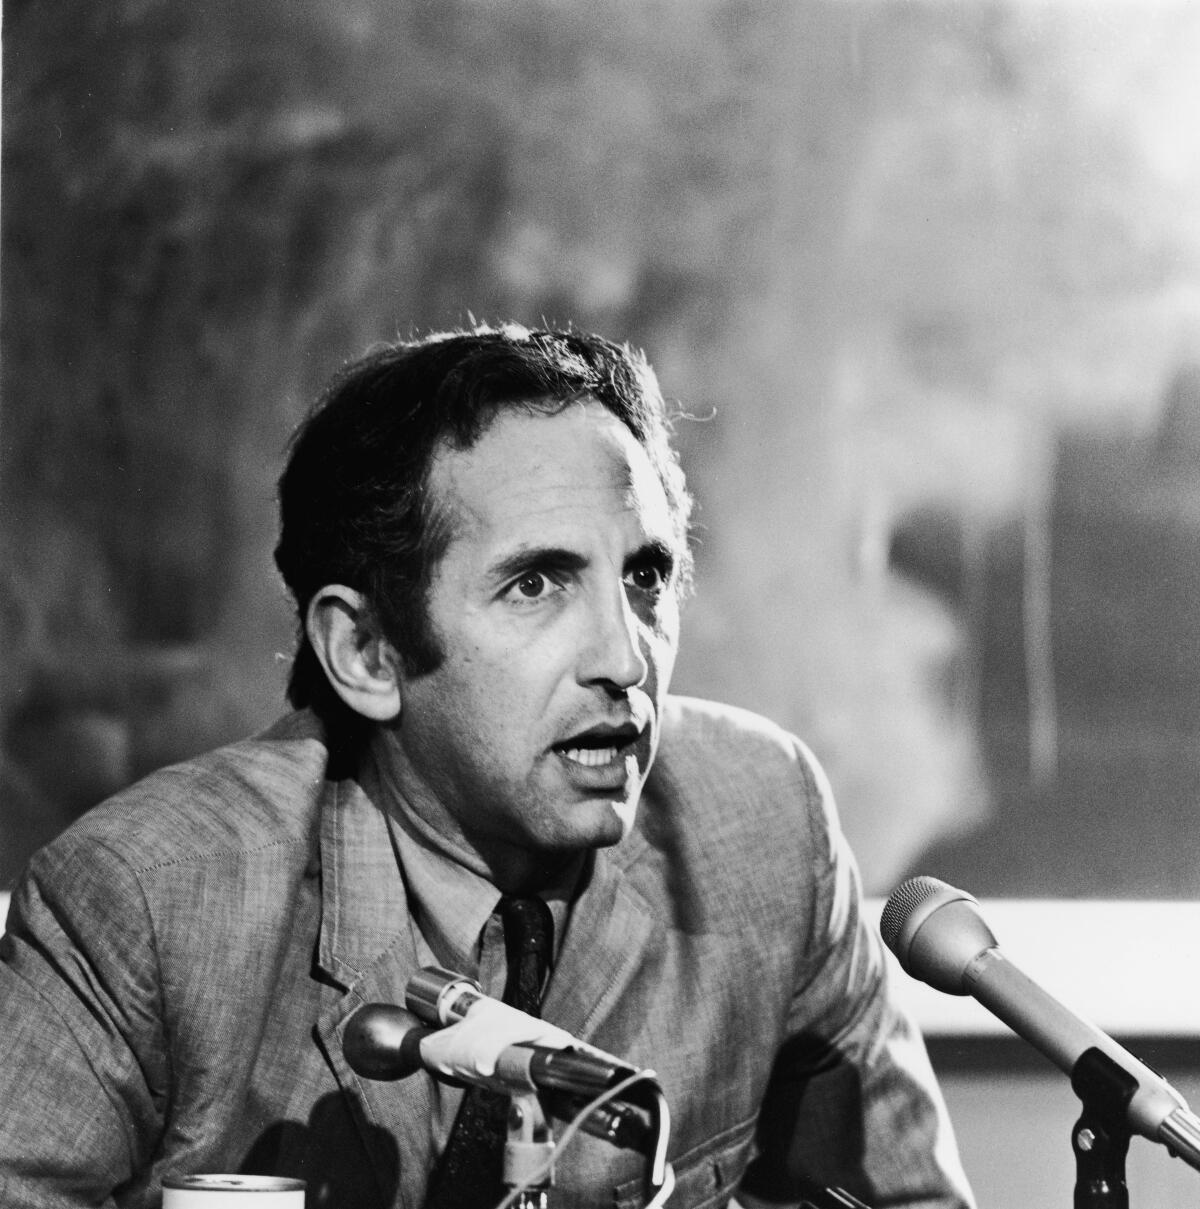 A black-and-white photo of a man speaking into two microphones.